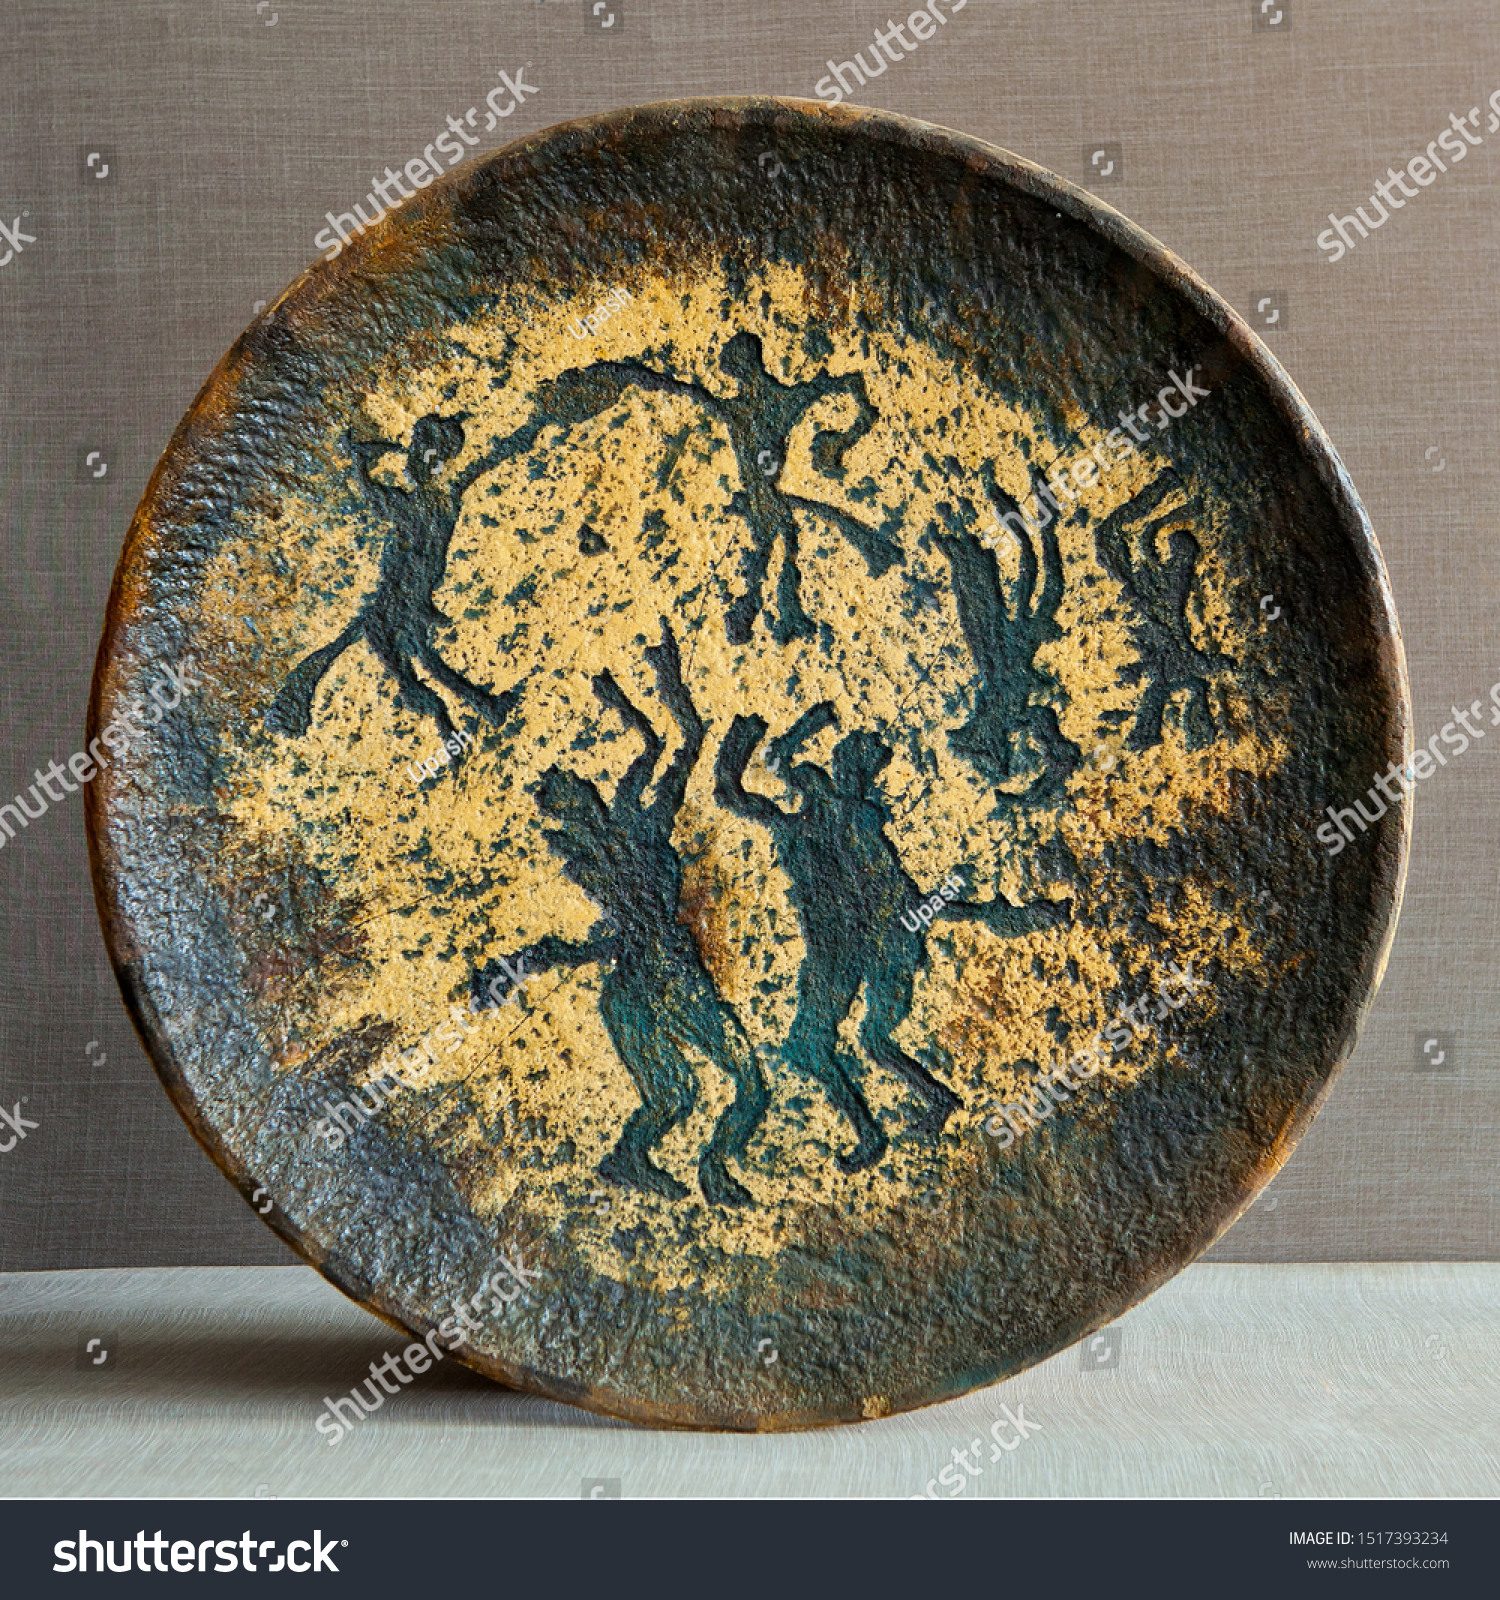 Ware from ceramics. Pictograms of nomadic peoples are displayed on the dishes. #1517393234